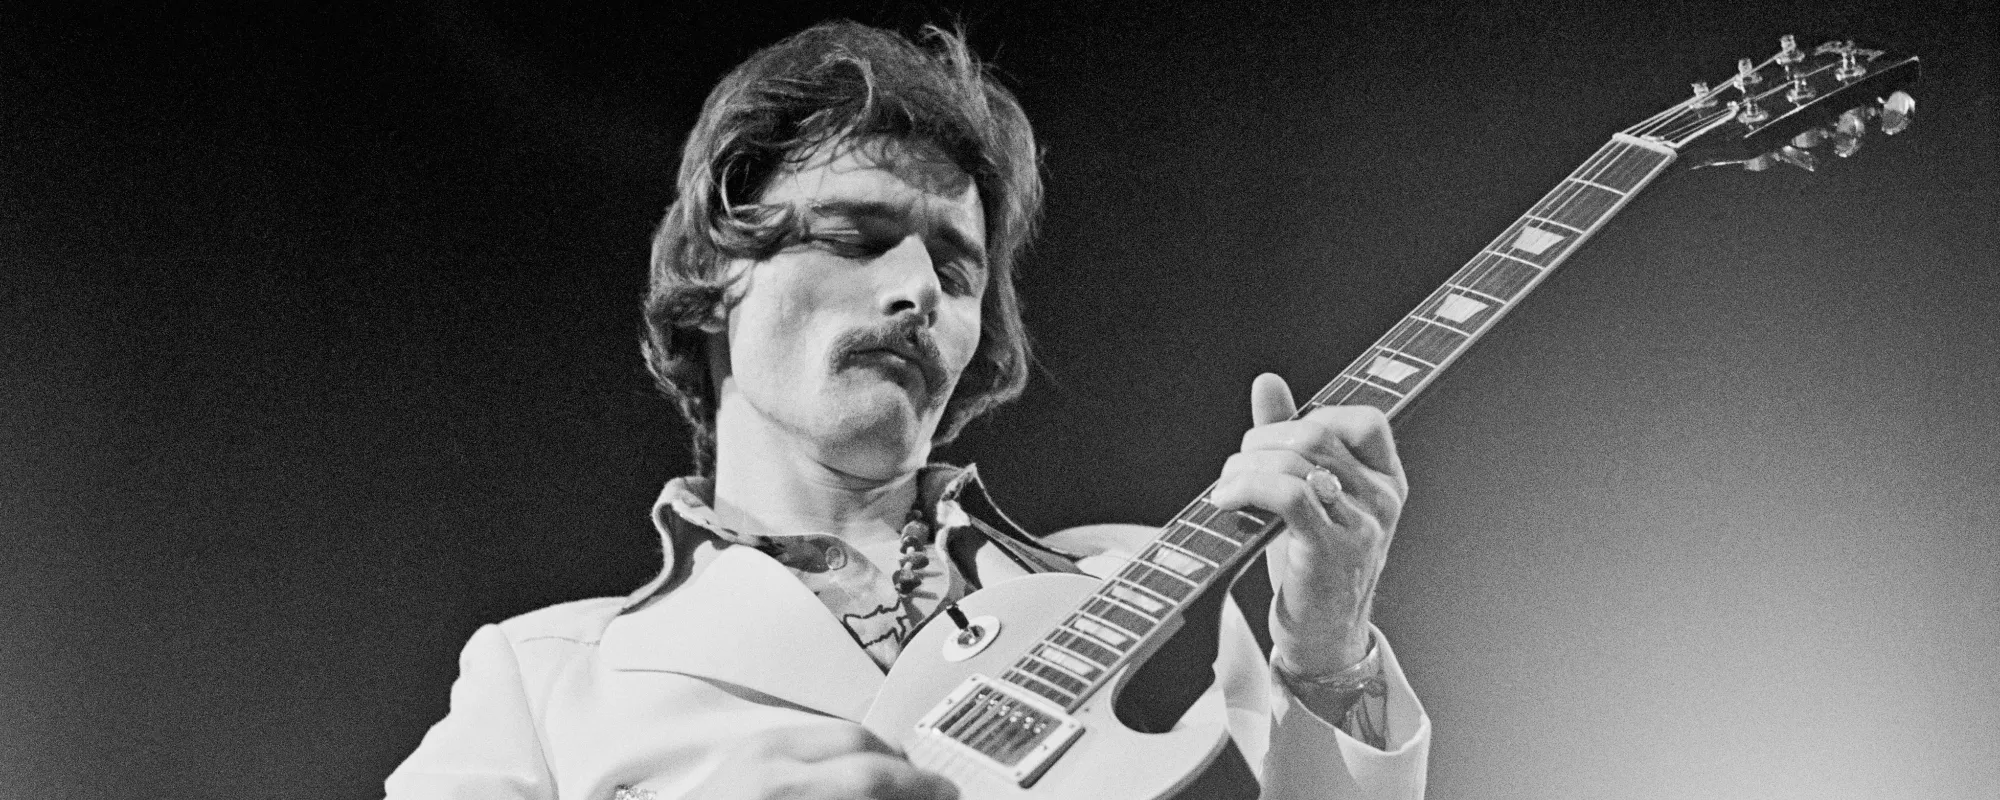 Dickey Betts’ Longtime Manager Shares Details Over the Death of Allman Brothers Band Legend